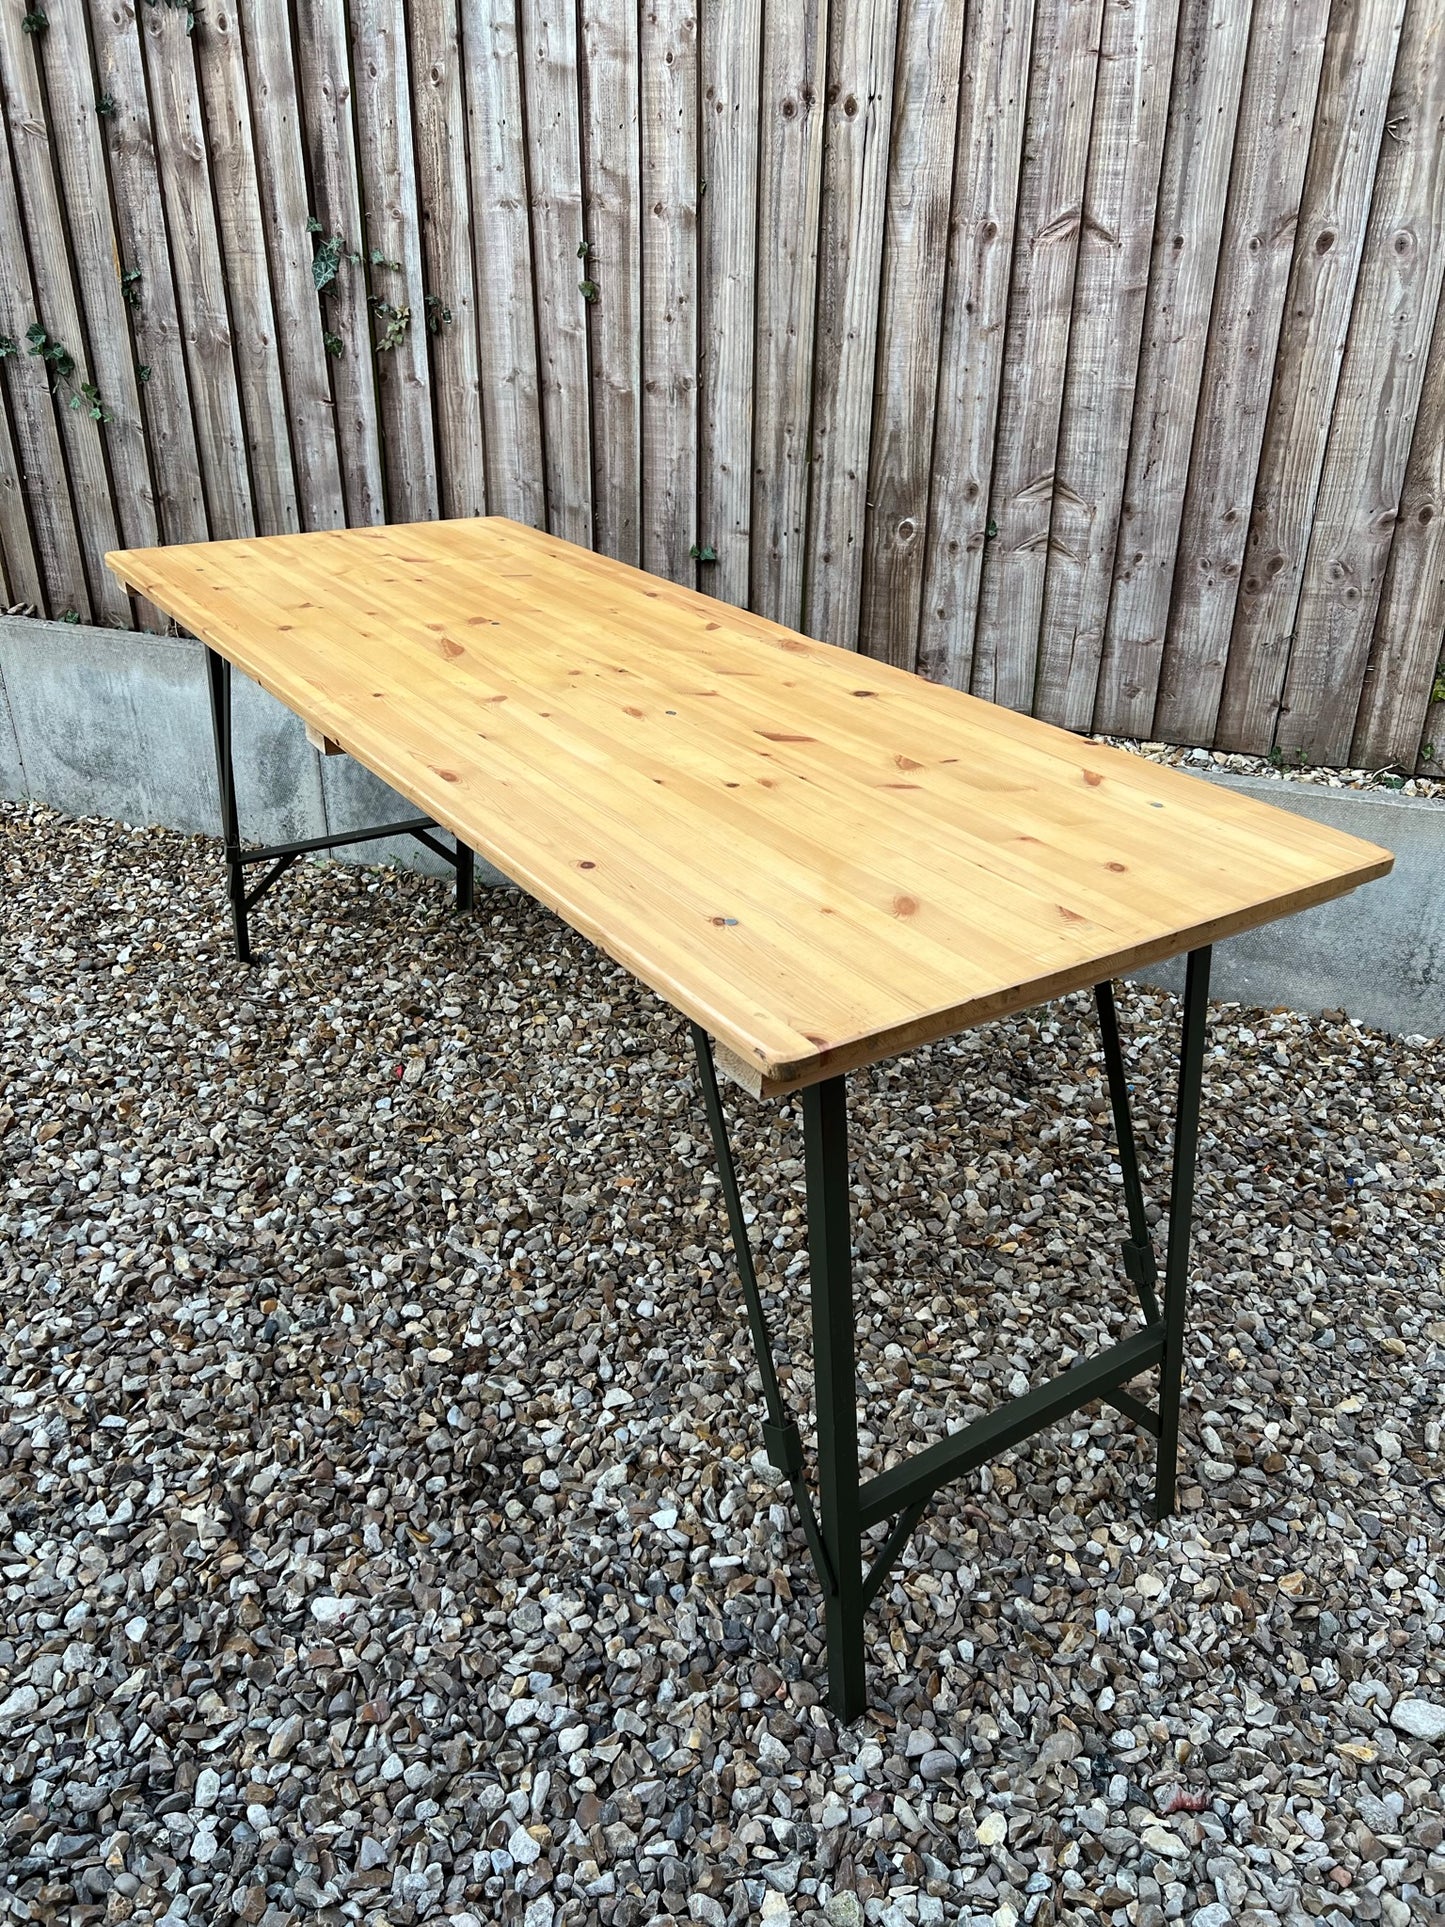 Wooden Folding Trestle Table VGC Rustic Farmhouse Dining Wedding Reclaimed Ex Army Industrial Office Desk